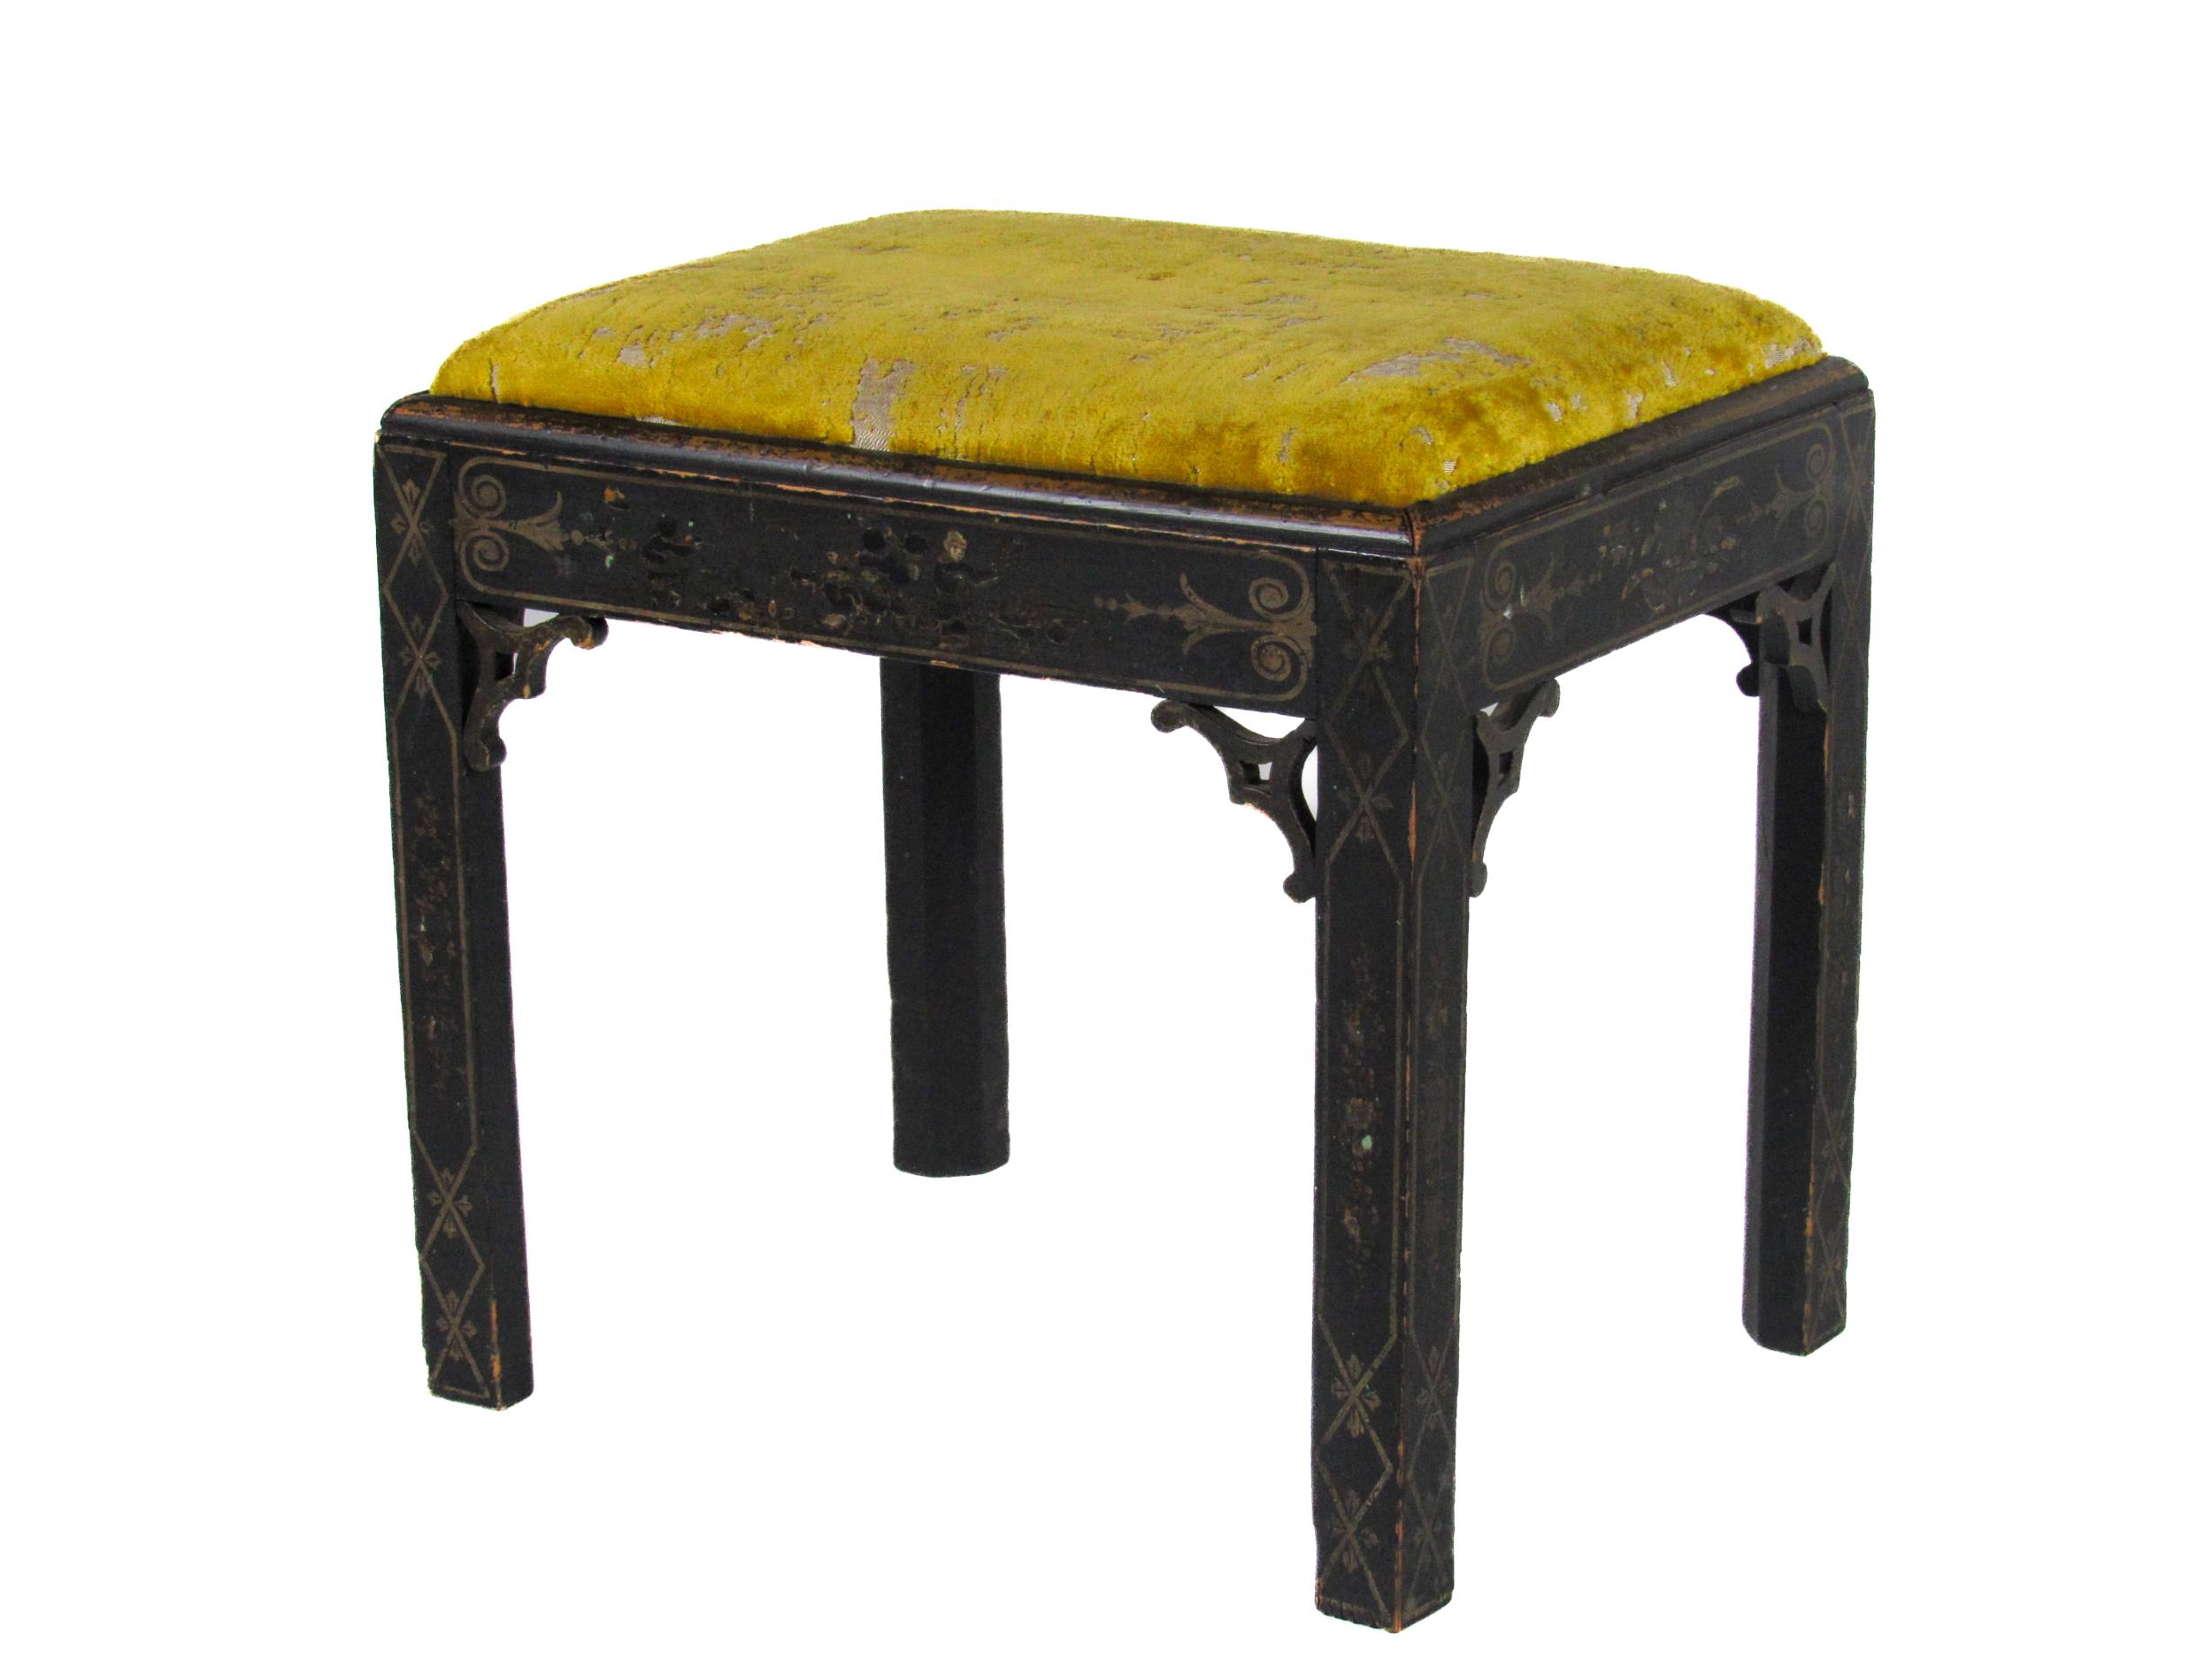 A 19th Century Irish chinoiserie decorated and ebonised Stool, of rectangular form with drop in seat